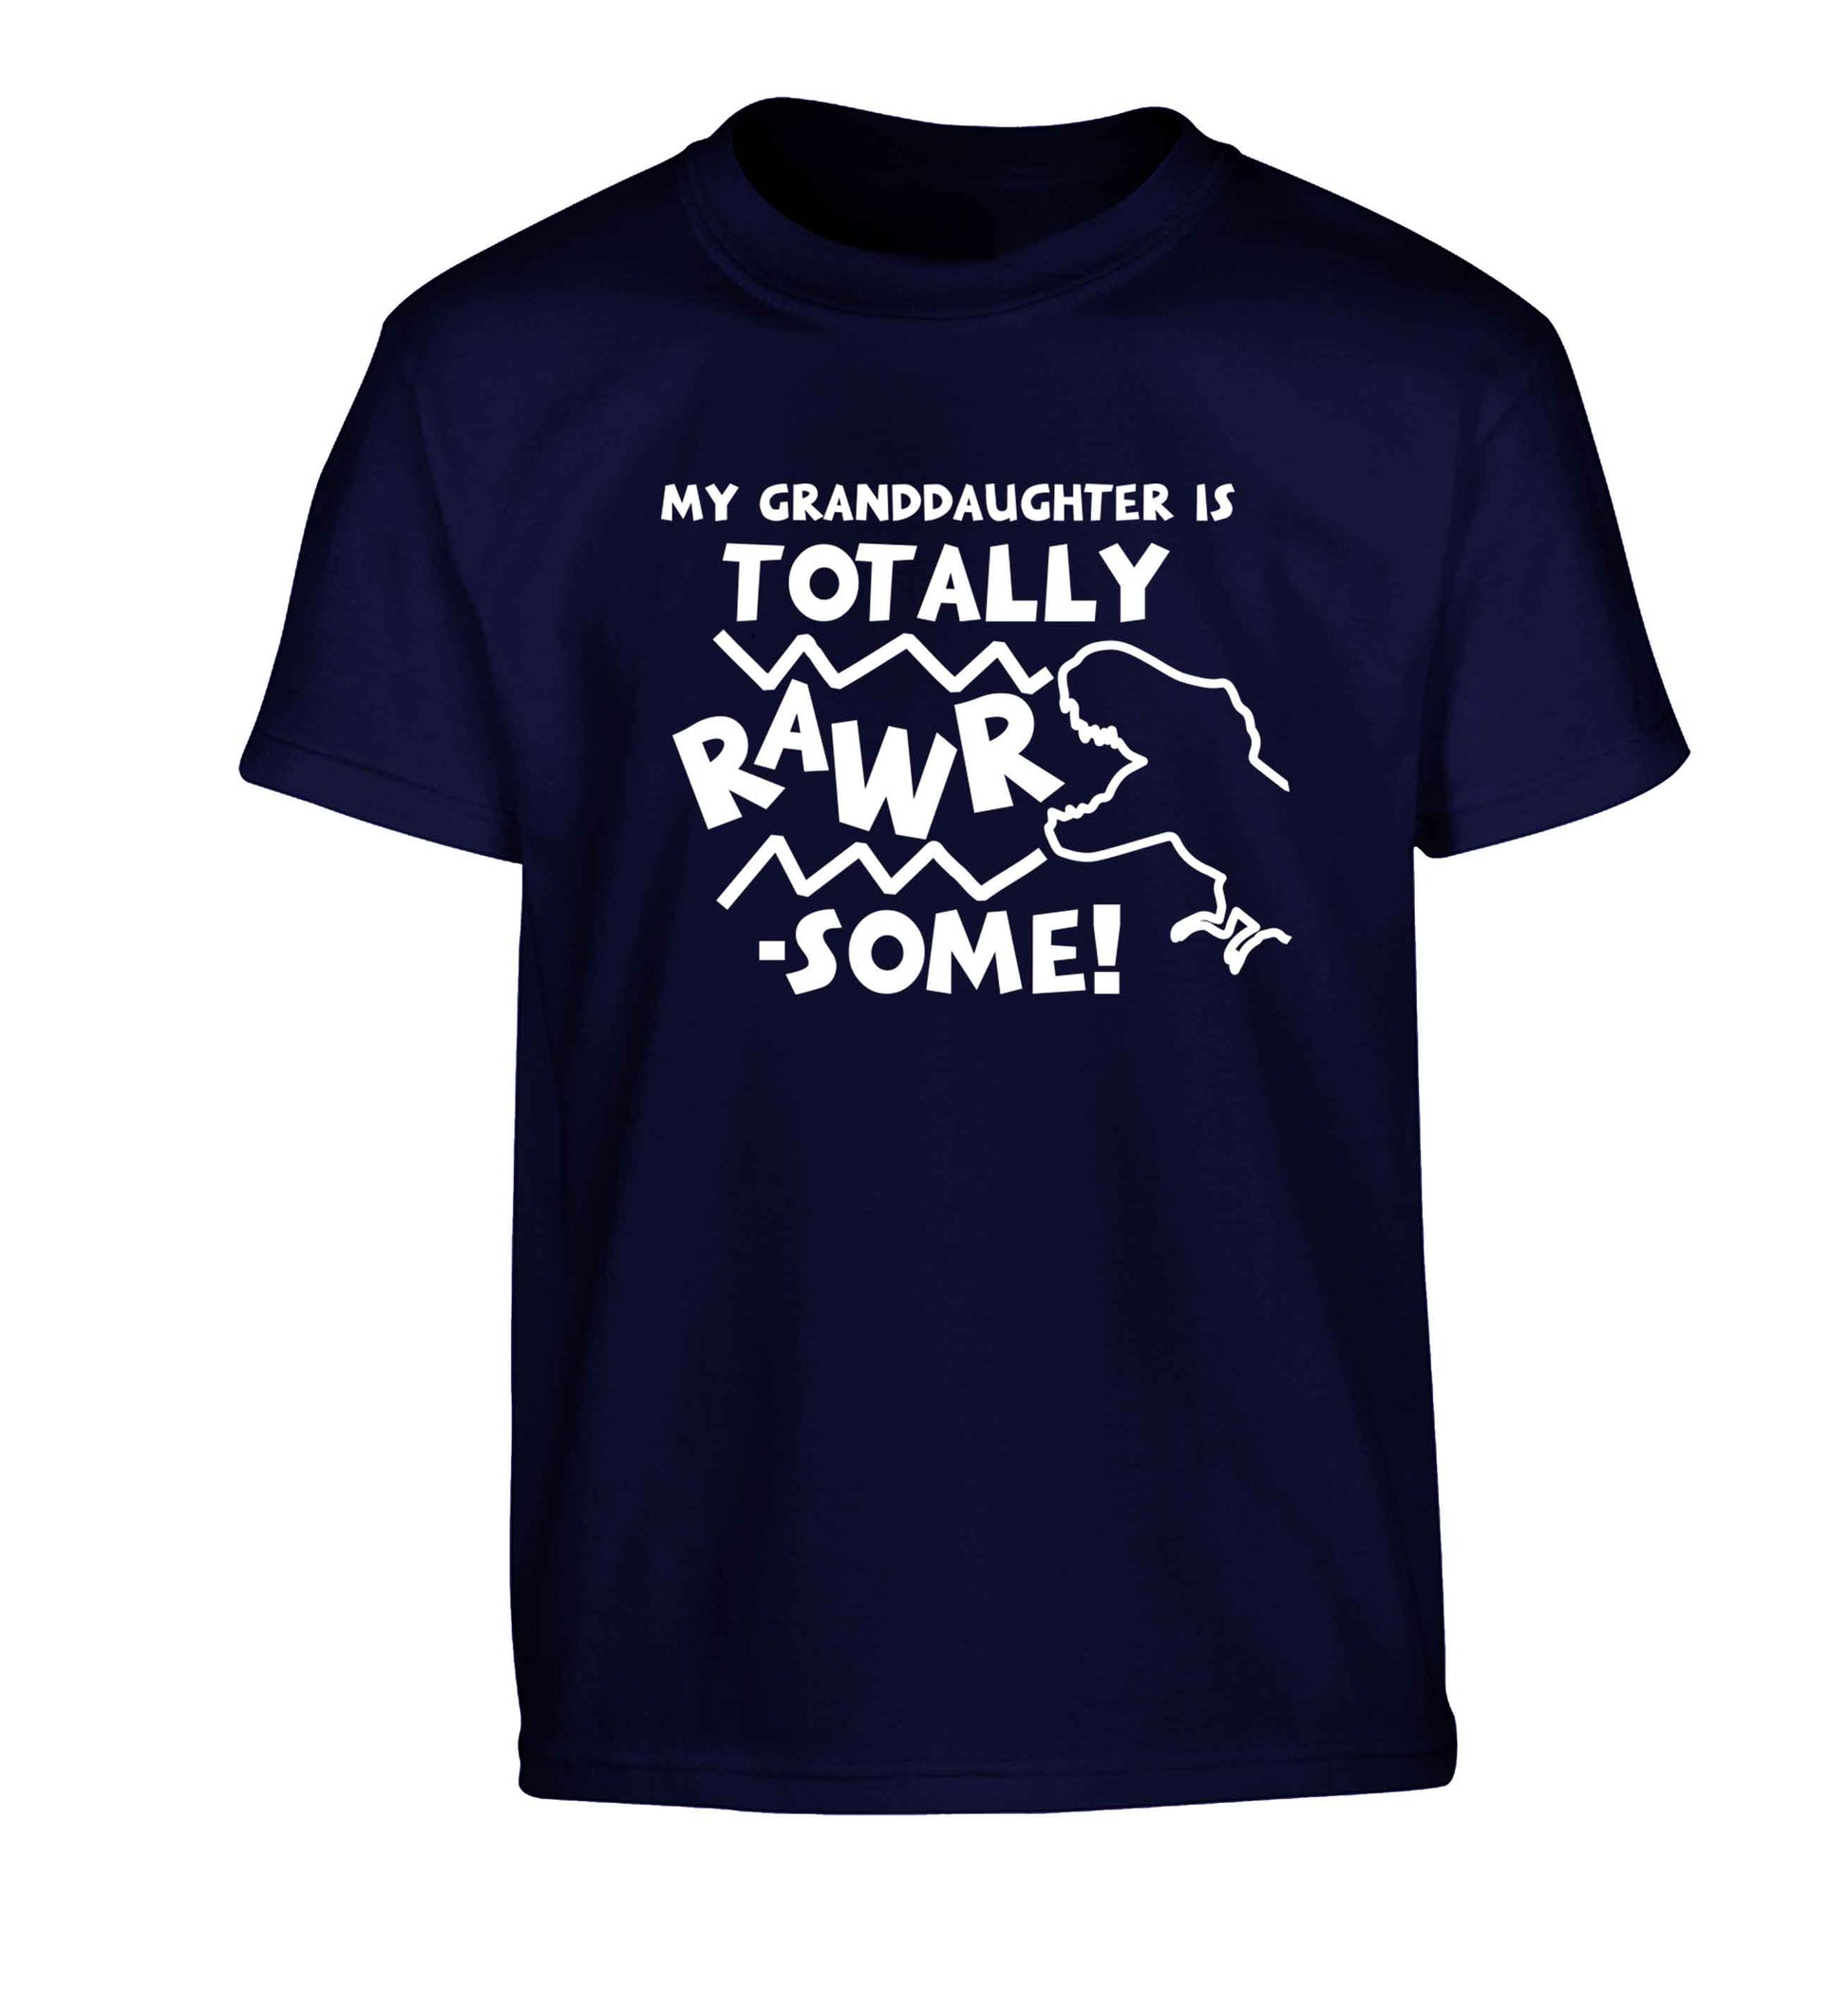 My granddaughter is totally rawrsome Children's navy Tshirt 12-13 Years